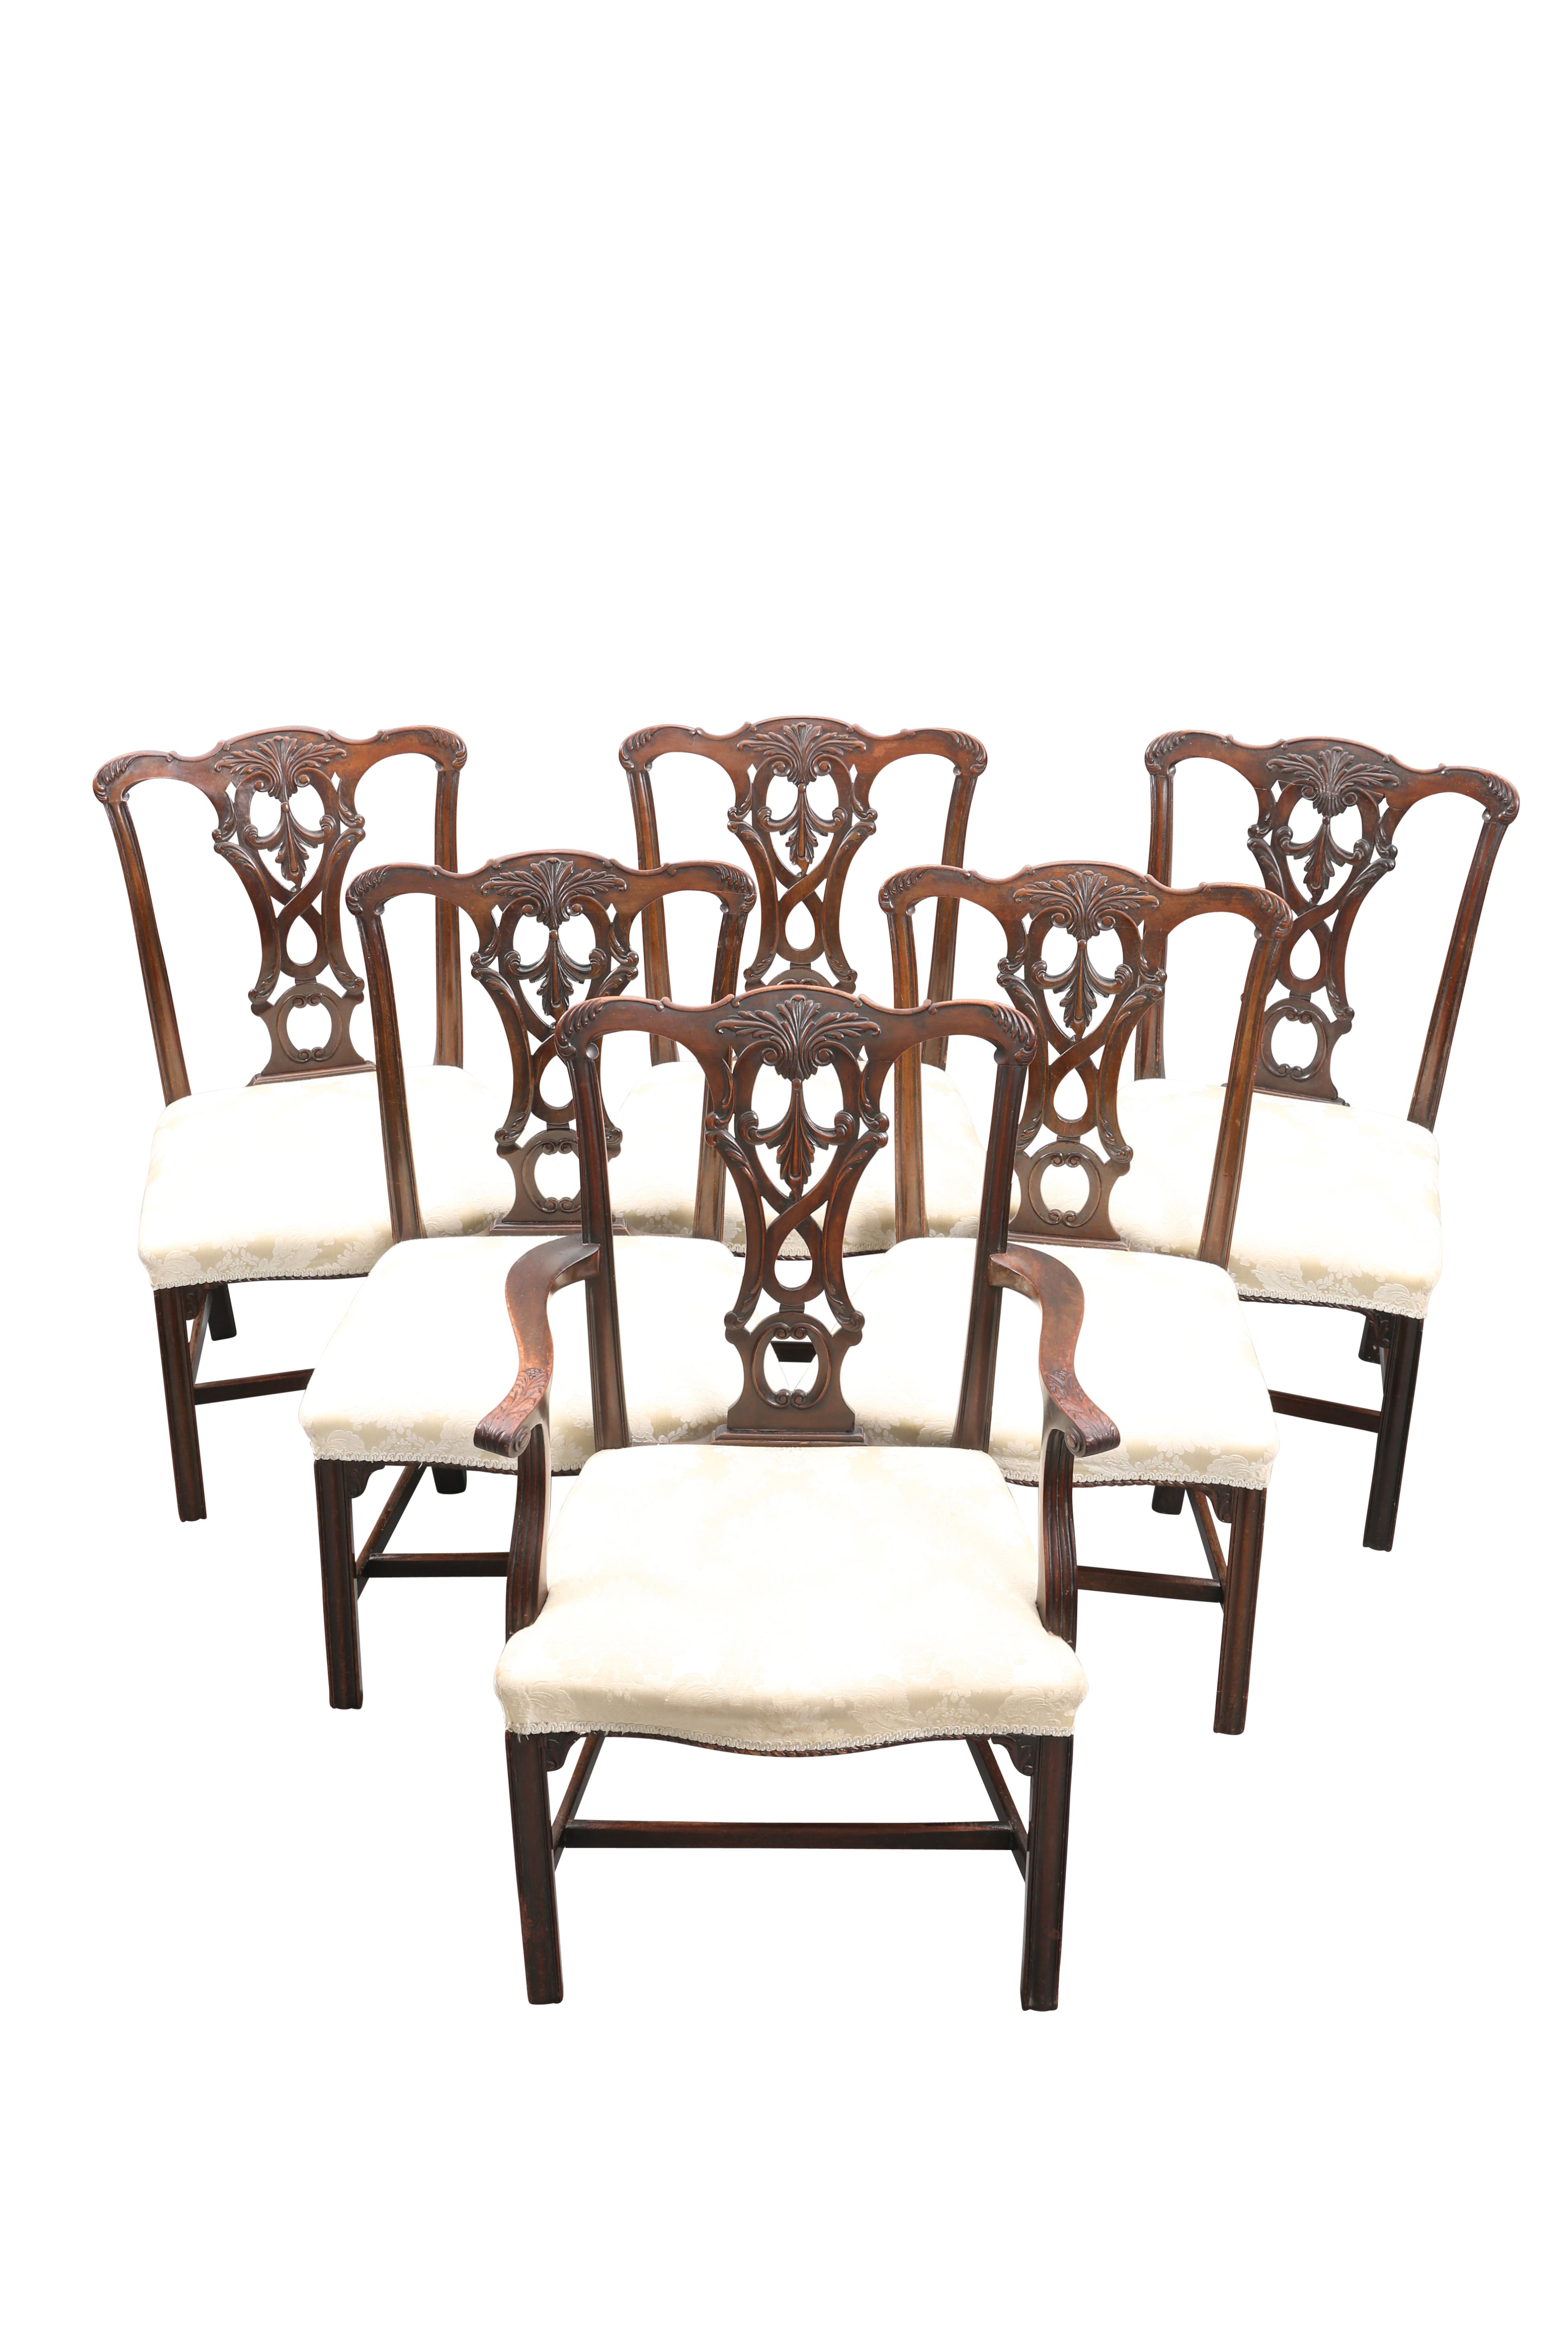 A SET OF SIX VICTORIAN CHIPPENDALE STYLE MAHOGANY DINING CHAIRS